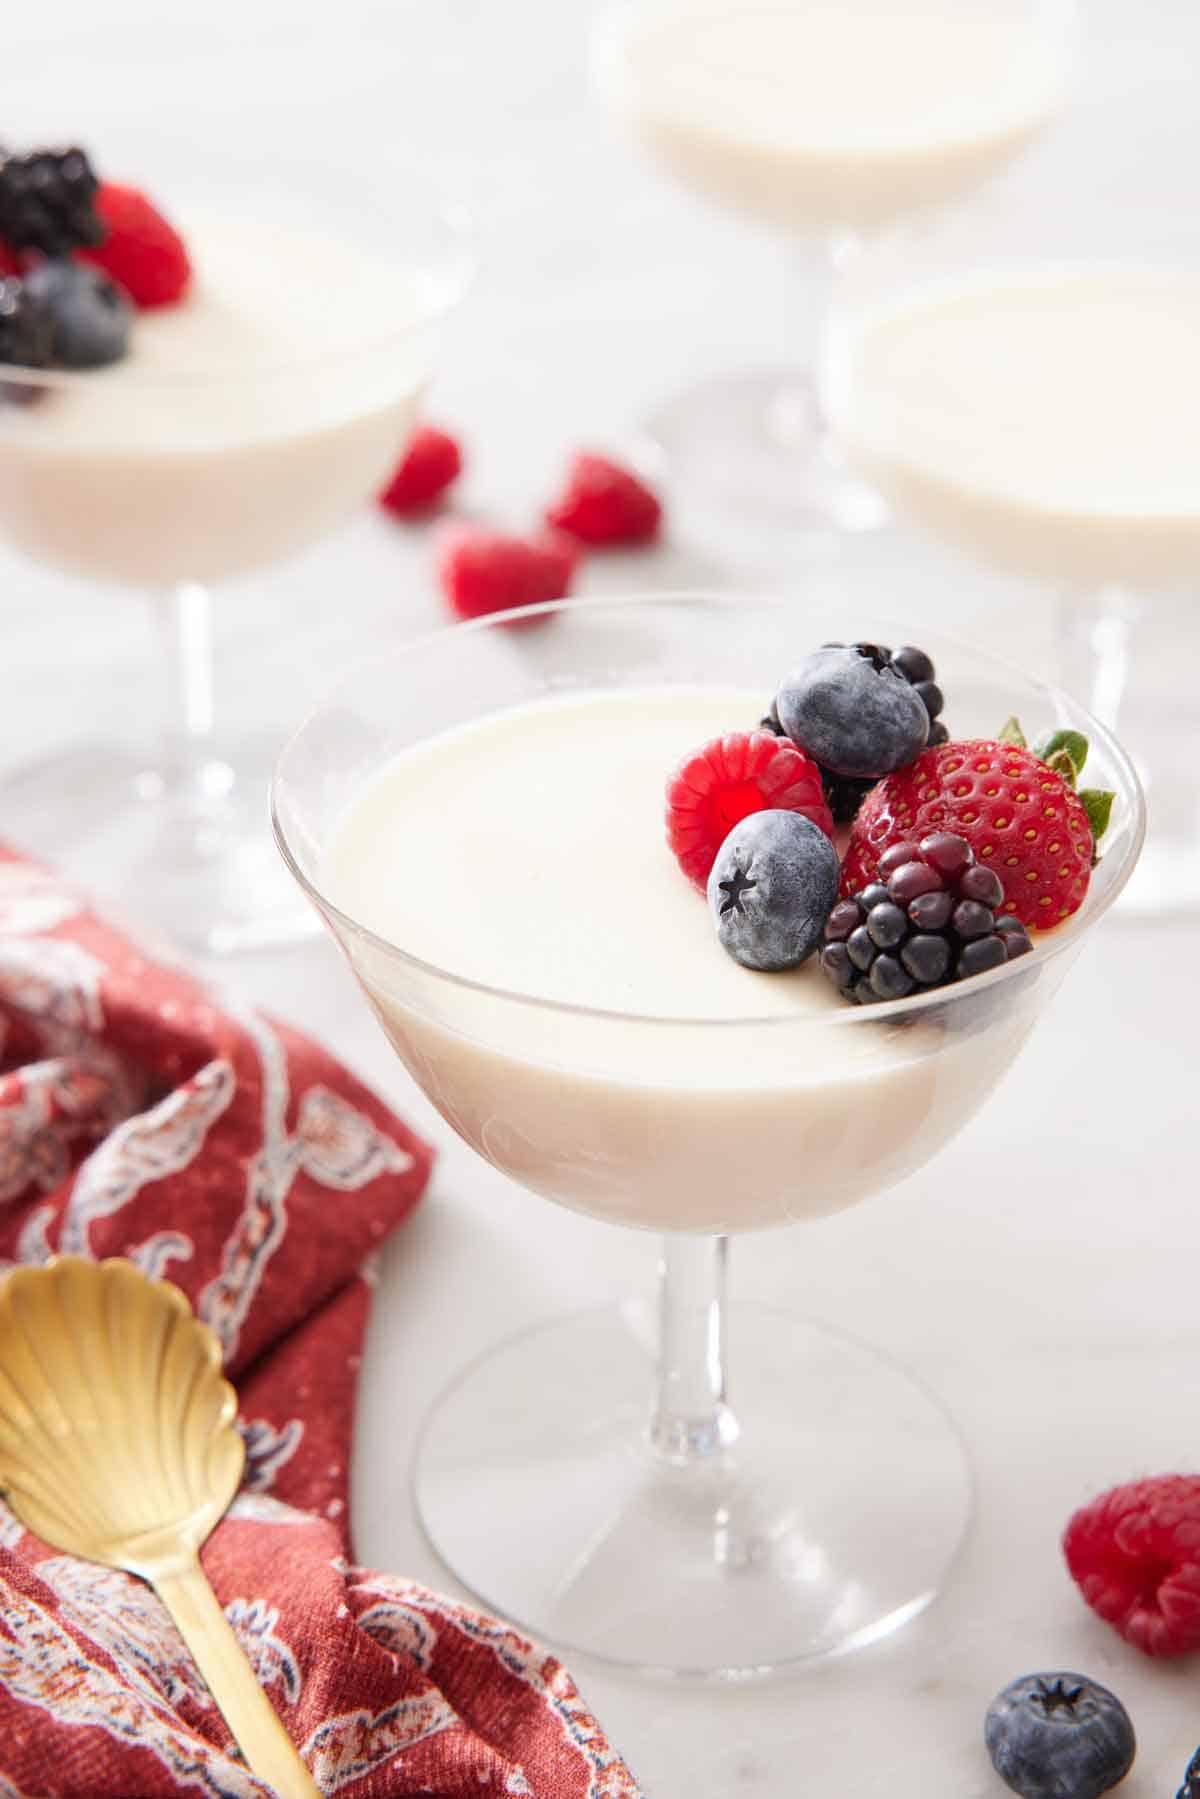 A glass of panna cotta topped with berries with more glasses in the background.